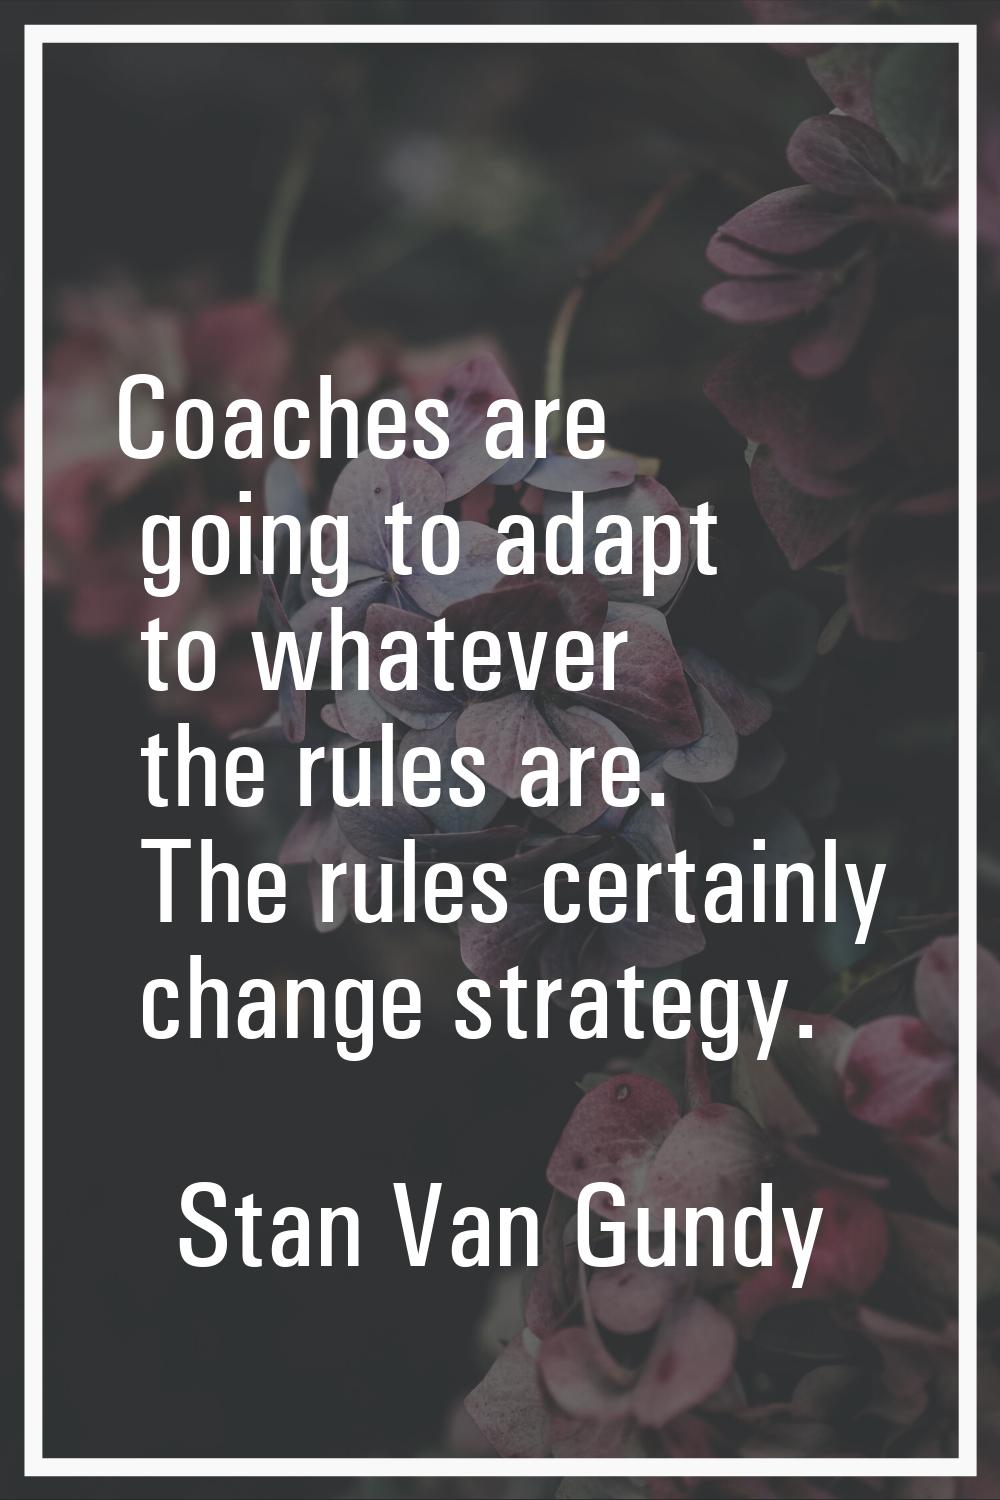 Coaches are going to adapt to whatever the rules are. The rules certainly change strategy.